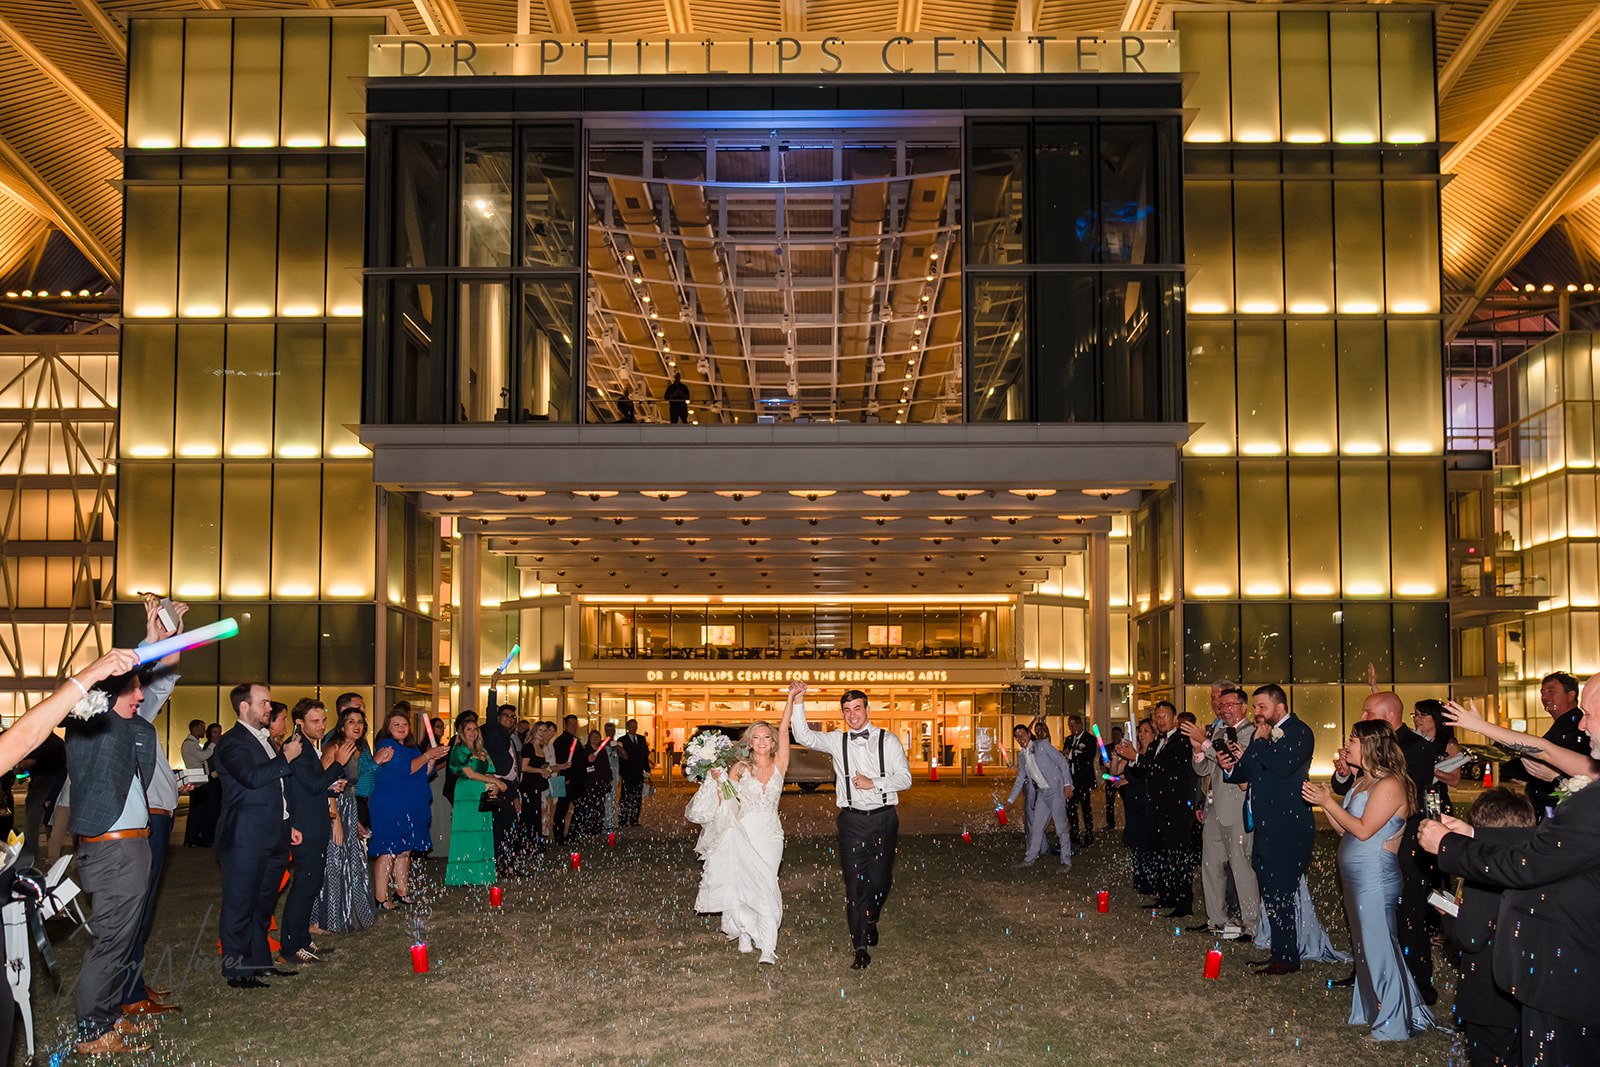 Colorful image of the bride and groom walking down the grand exit, holding hands with hands raised between them, surrounded by bubbles and guests clapping in celebration in front of the Dr Phillips Performing Arts Center.